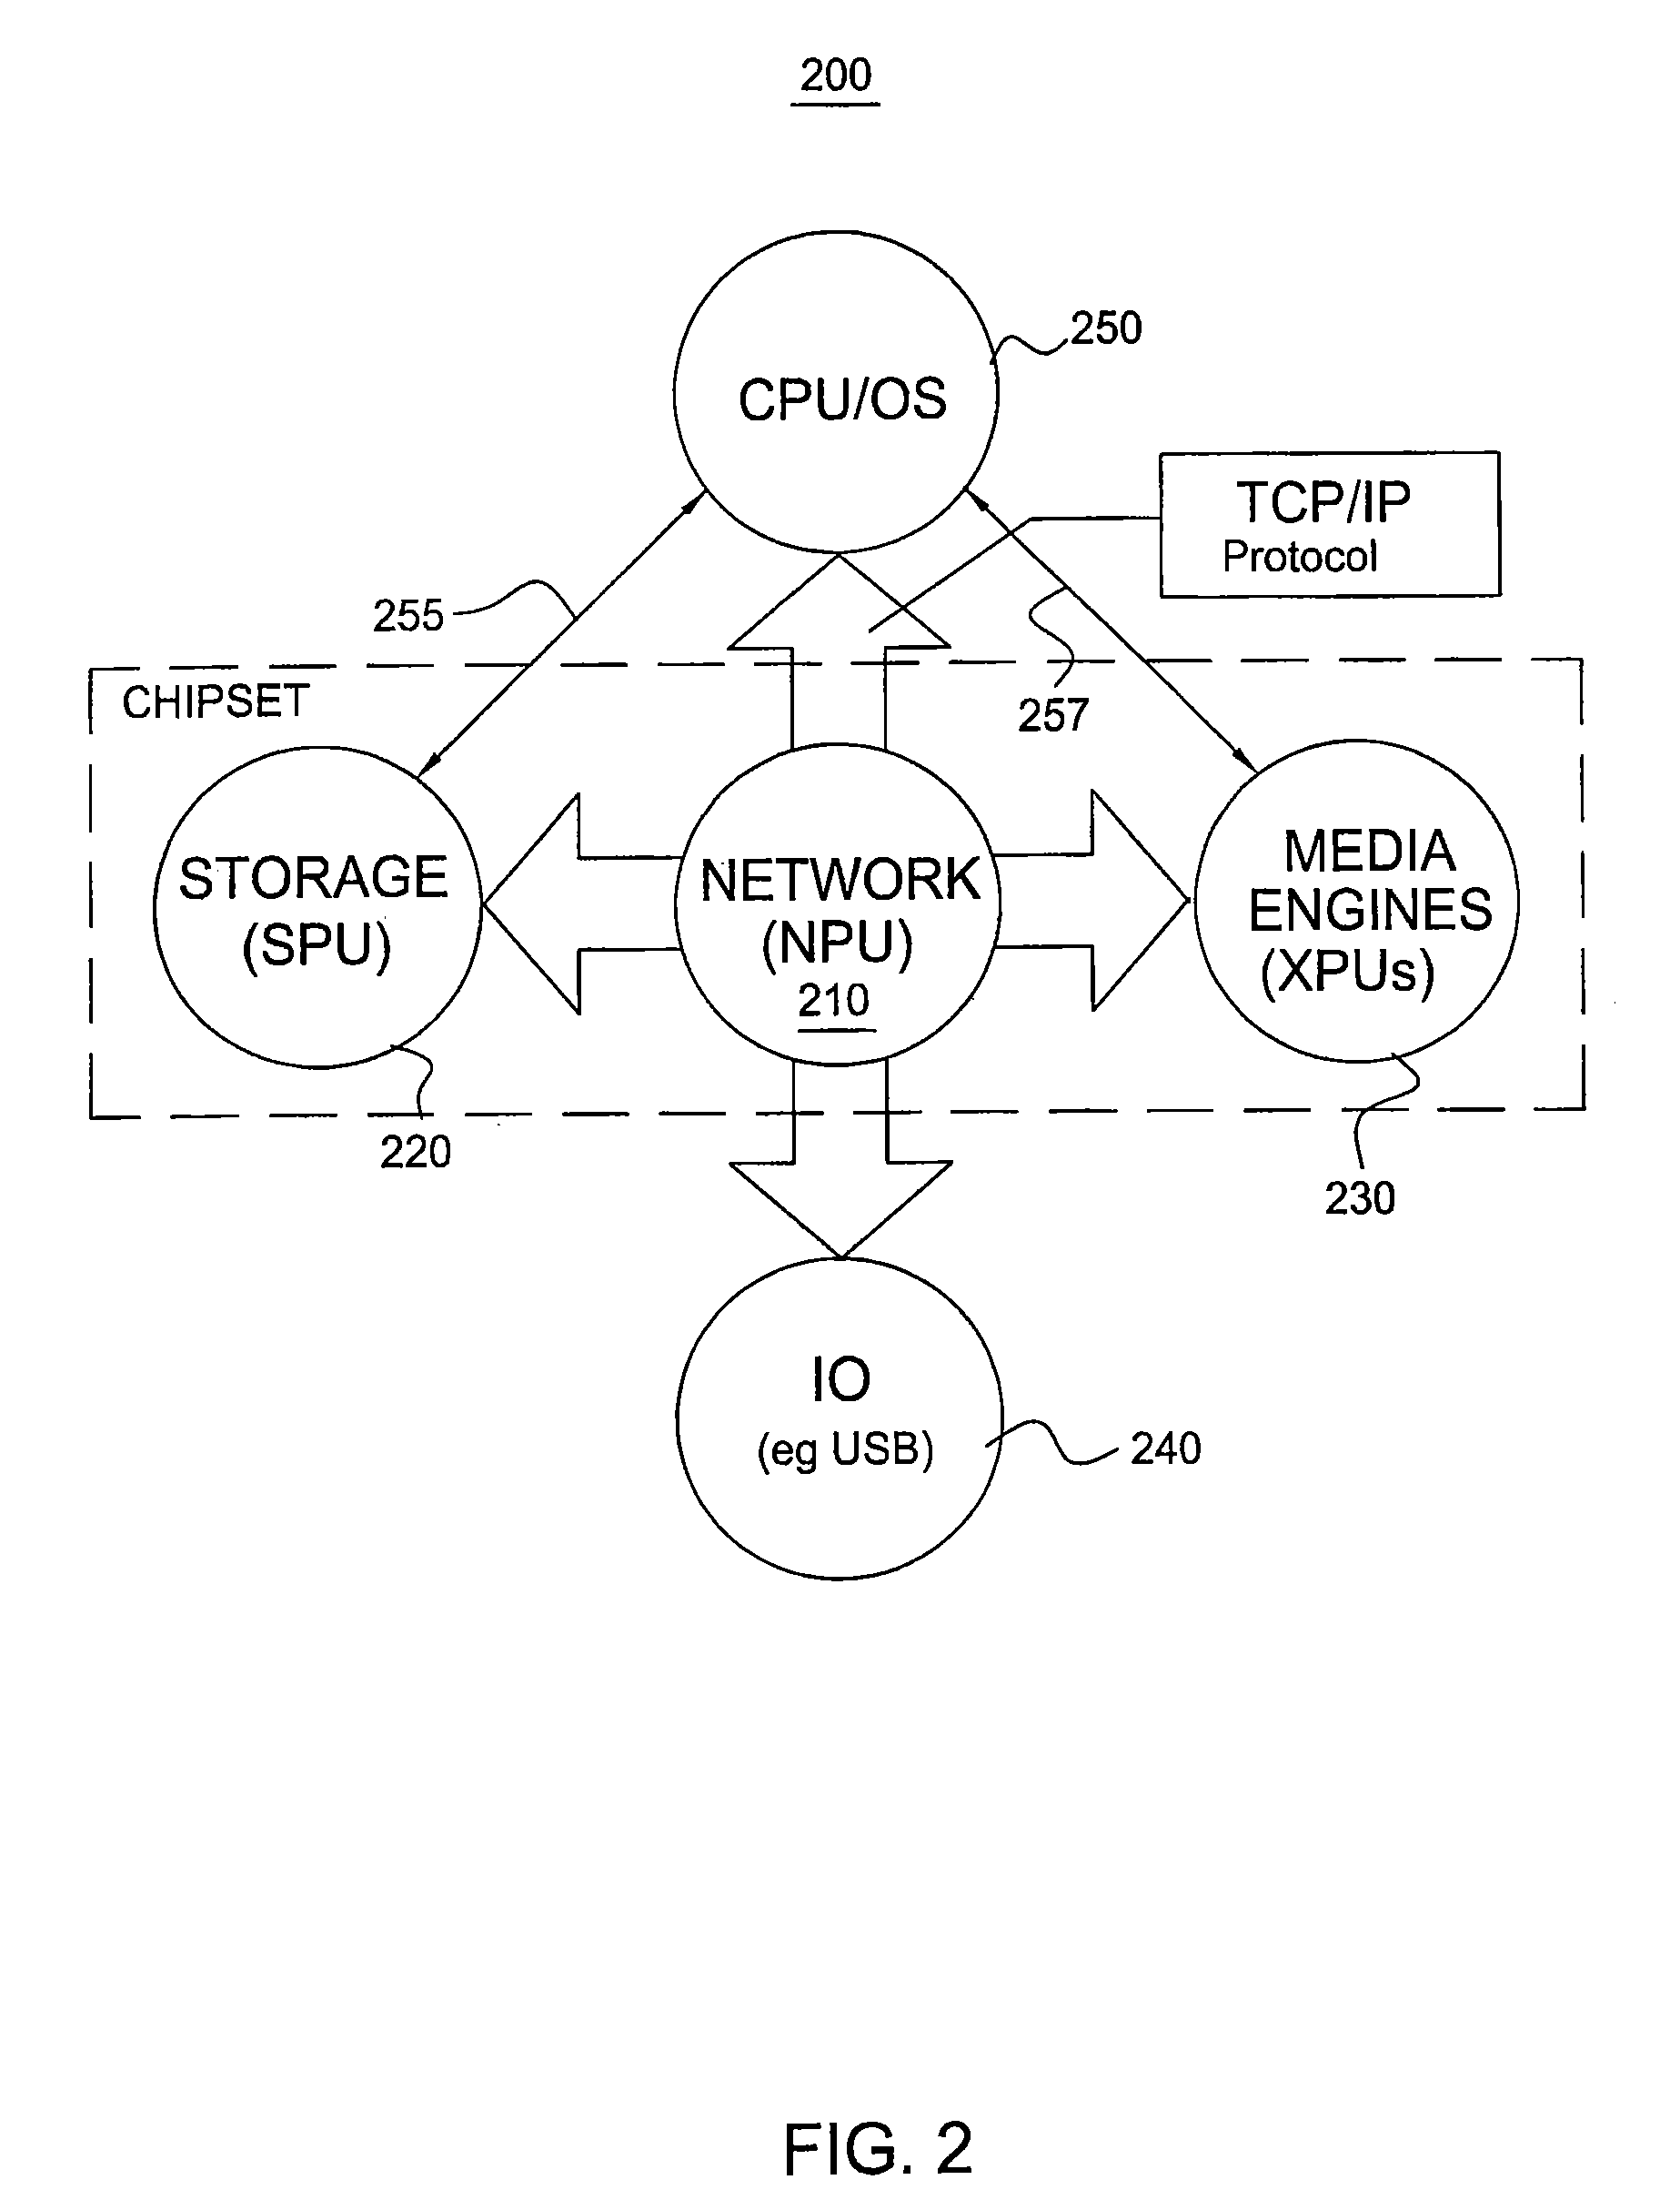 Internet protocol (IP) router residing in a processor chipset